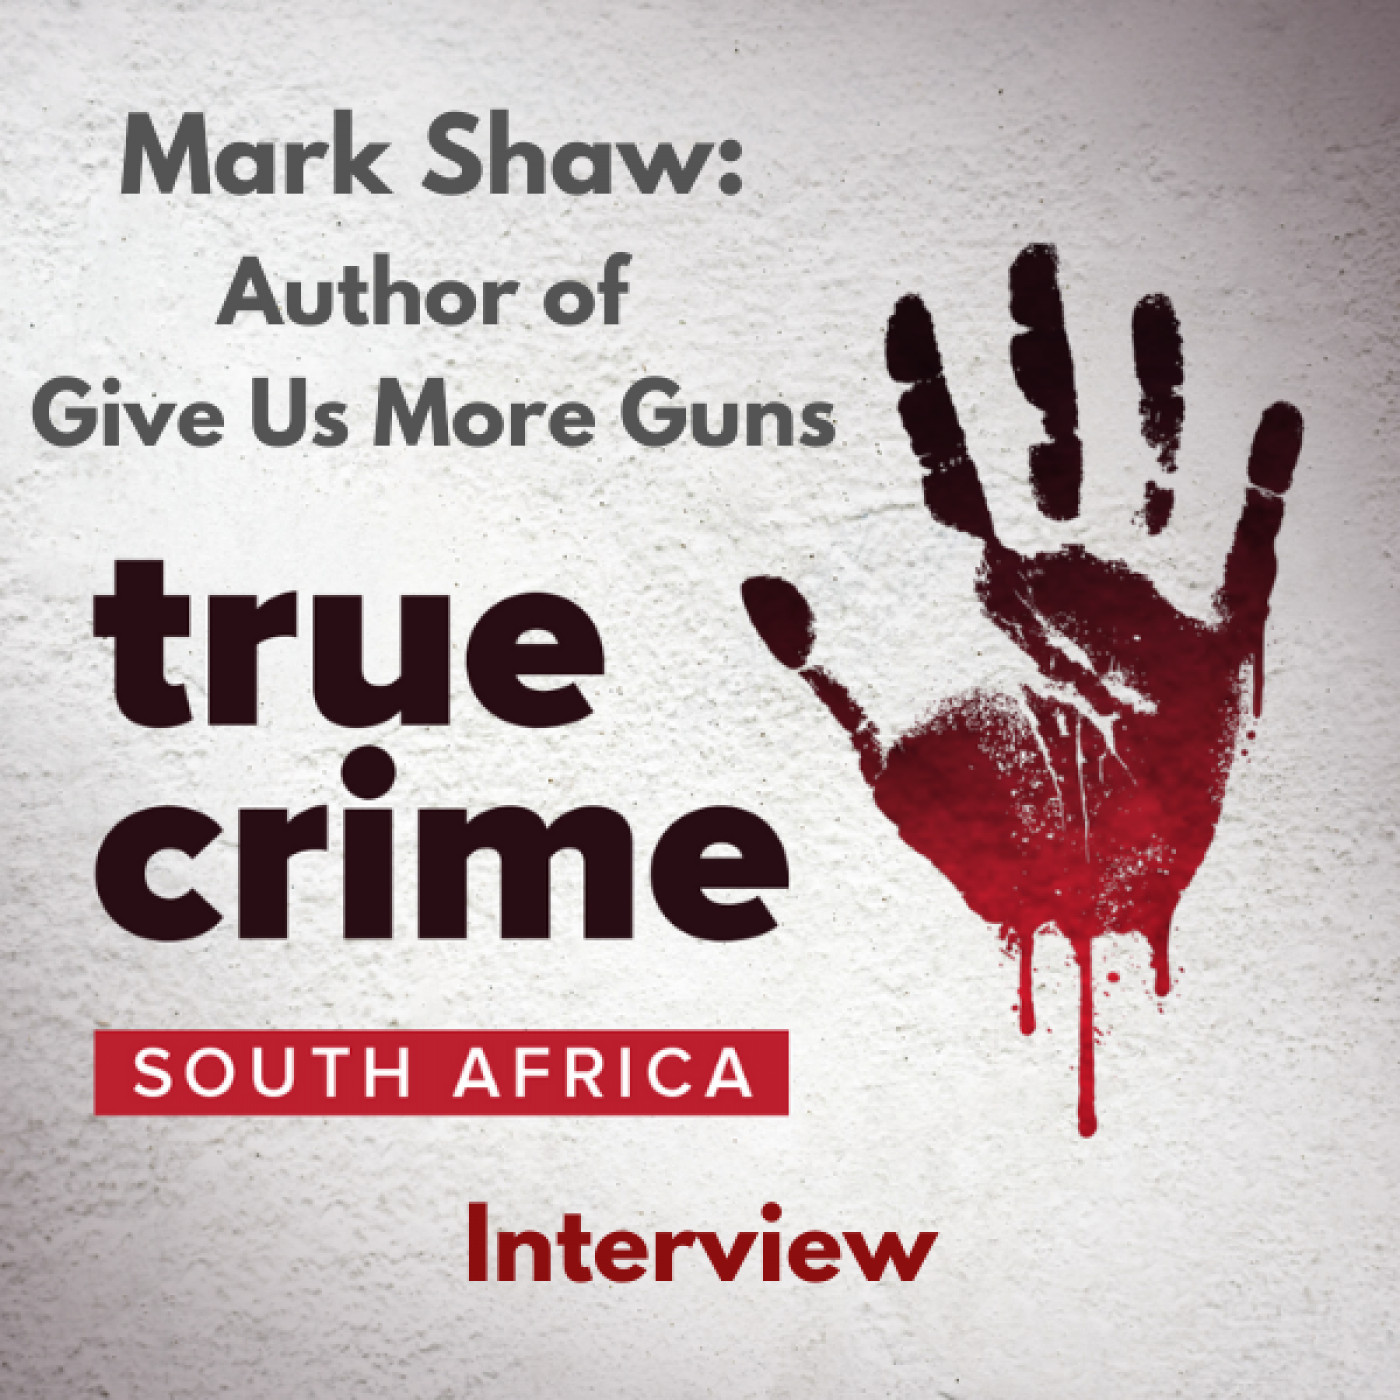 Interview: Mark Shaw - Author of Give Us More Guns